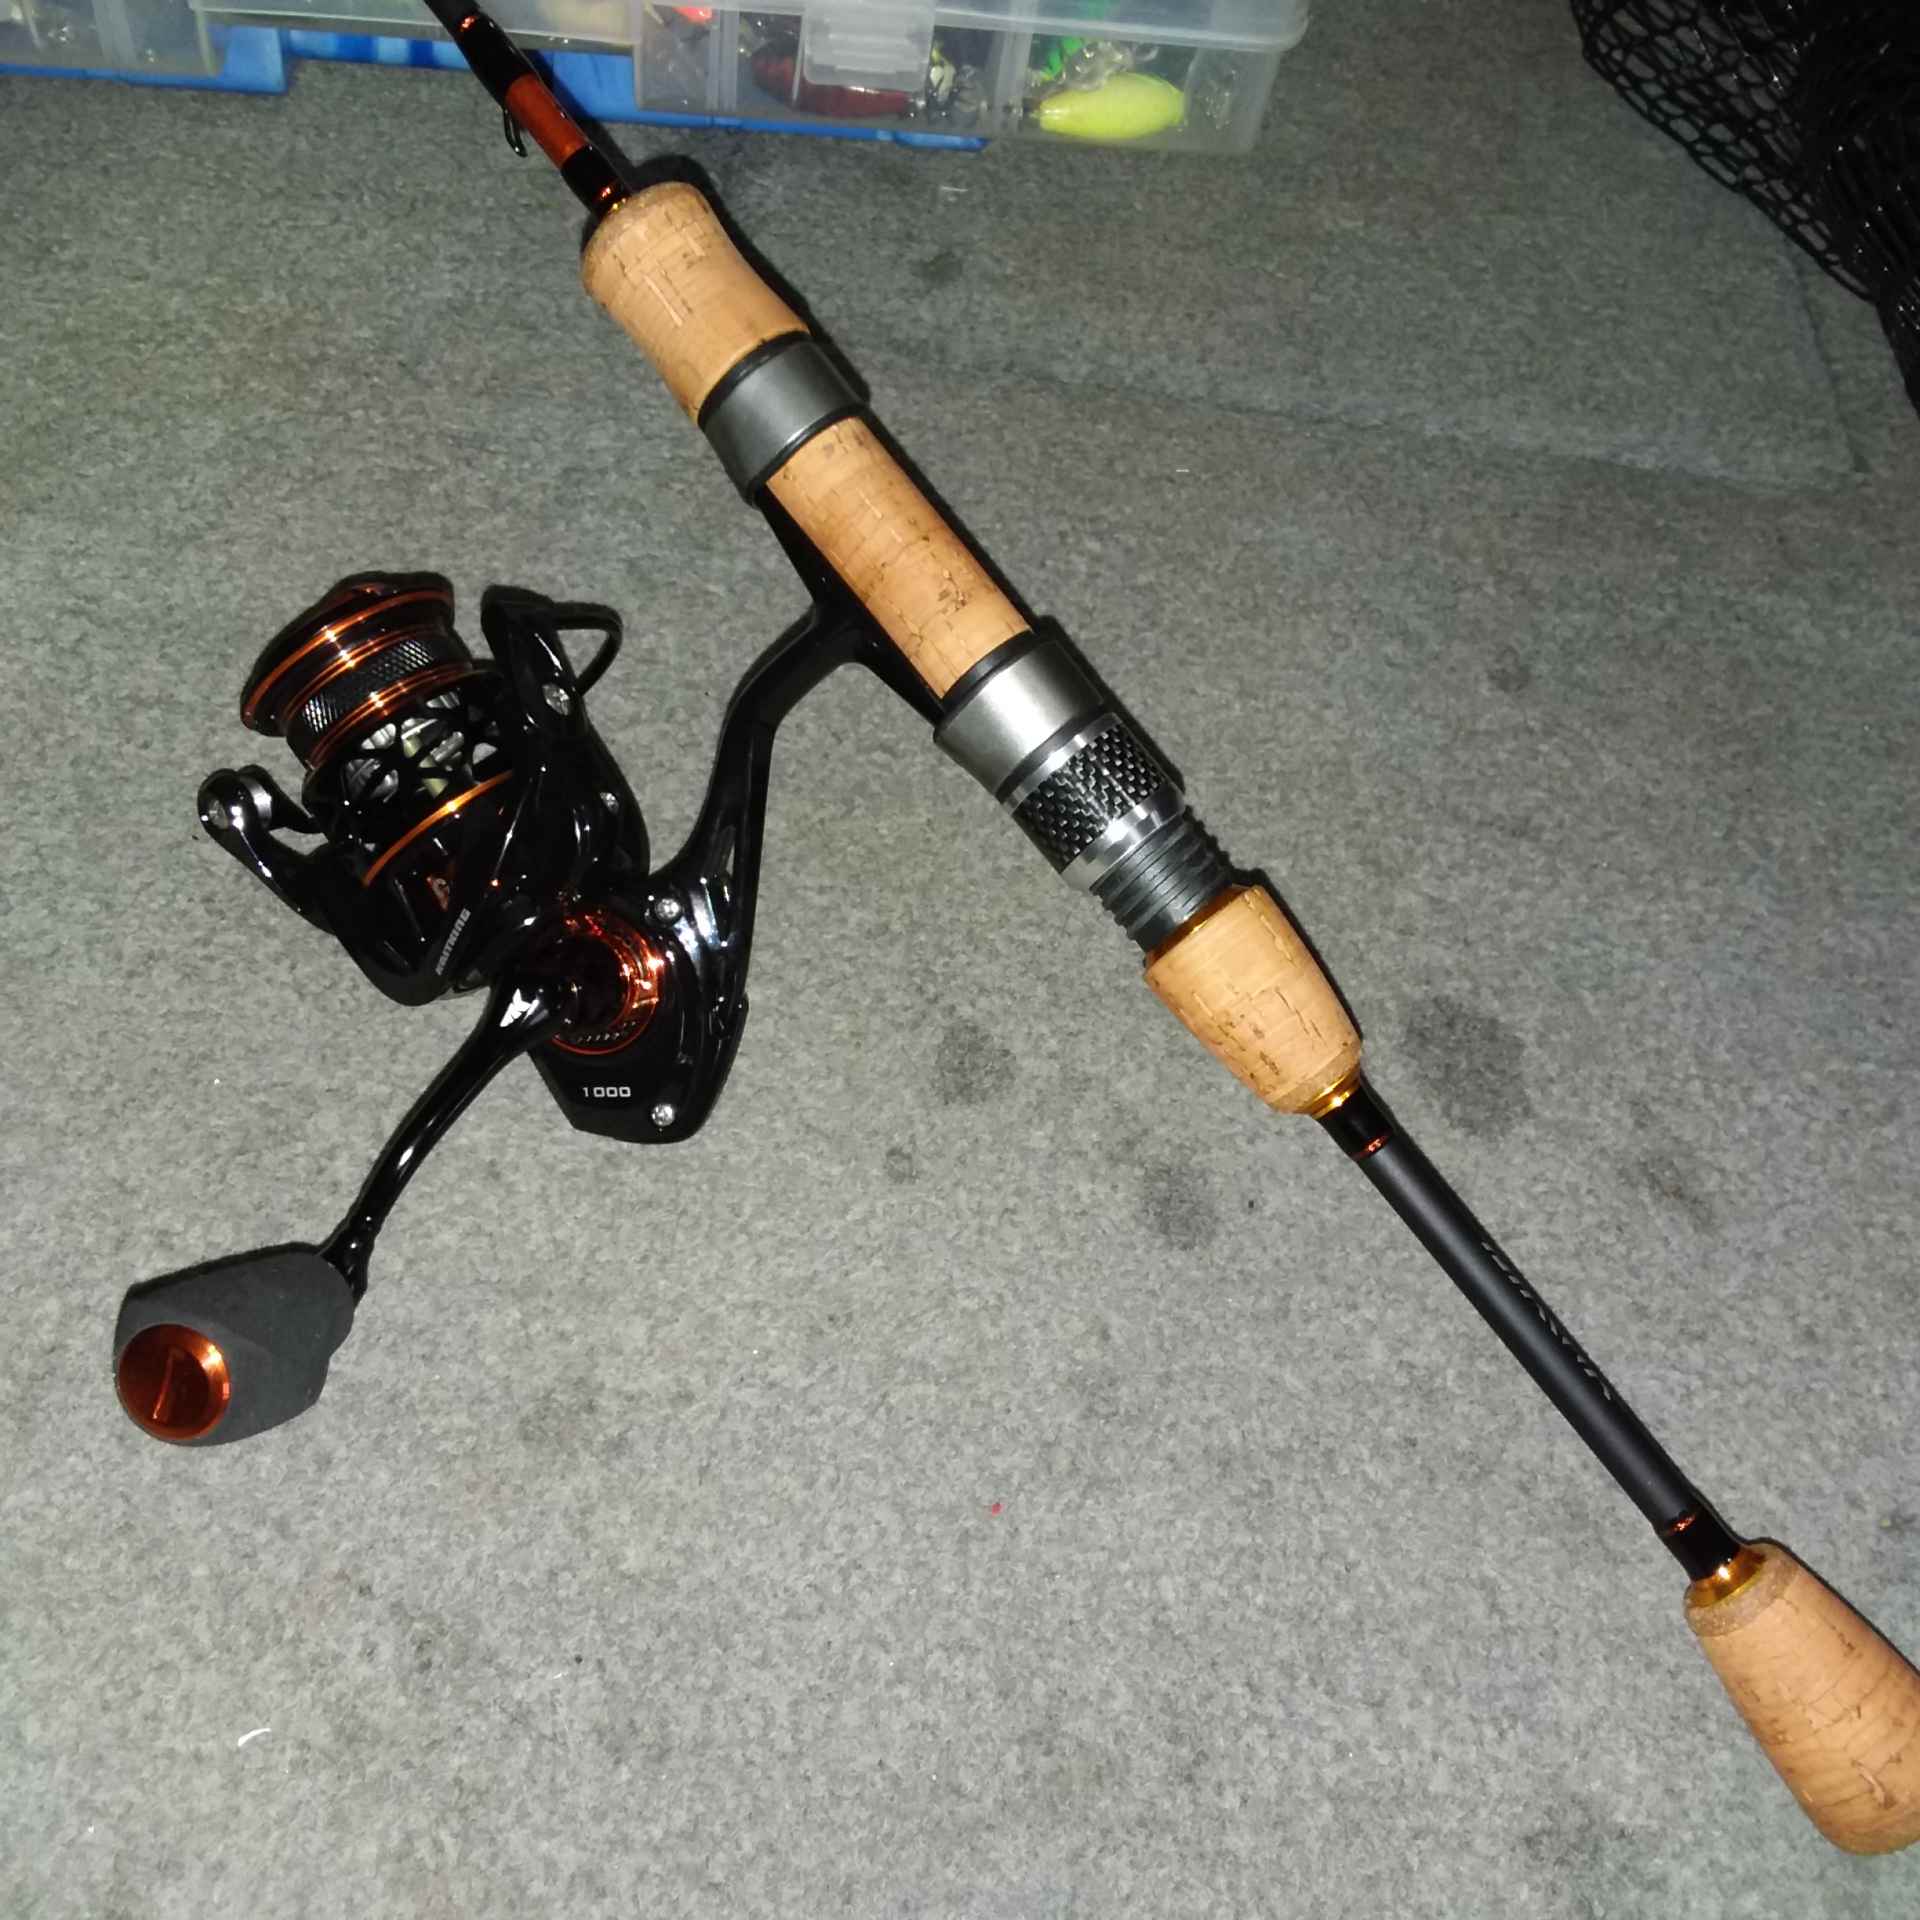 Approximate release date(s) for Ryobi Powerful DX-1 or Daiwa 500c UL spinning  reels? - Fishing Rods, Reels, Line, and Knots - Bass Fishing Forums